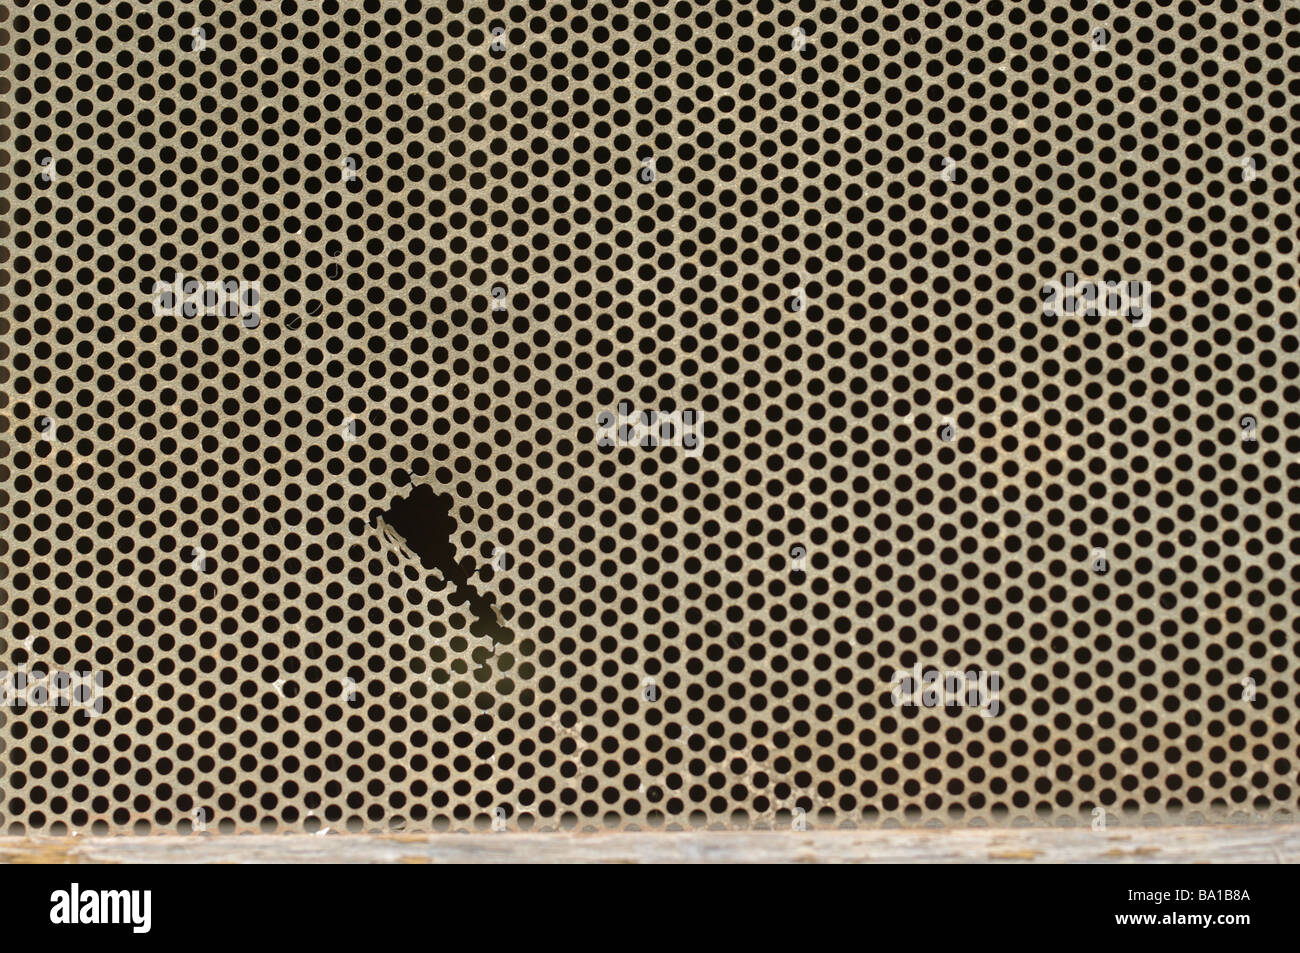 another dirty brass metal mesh screen background textures